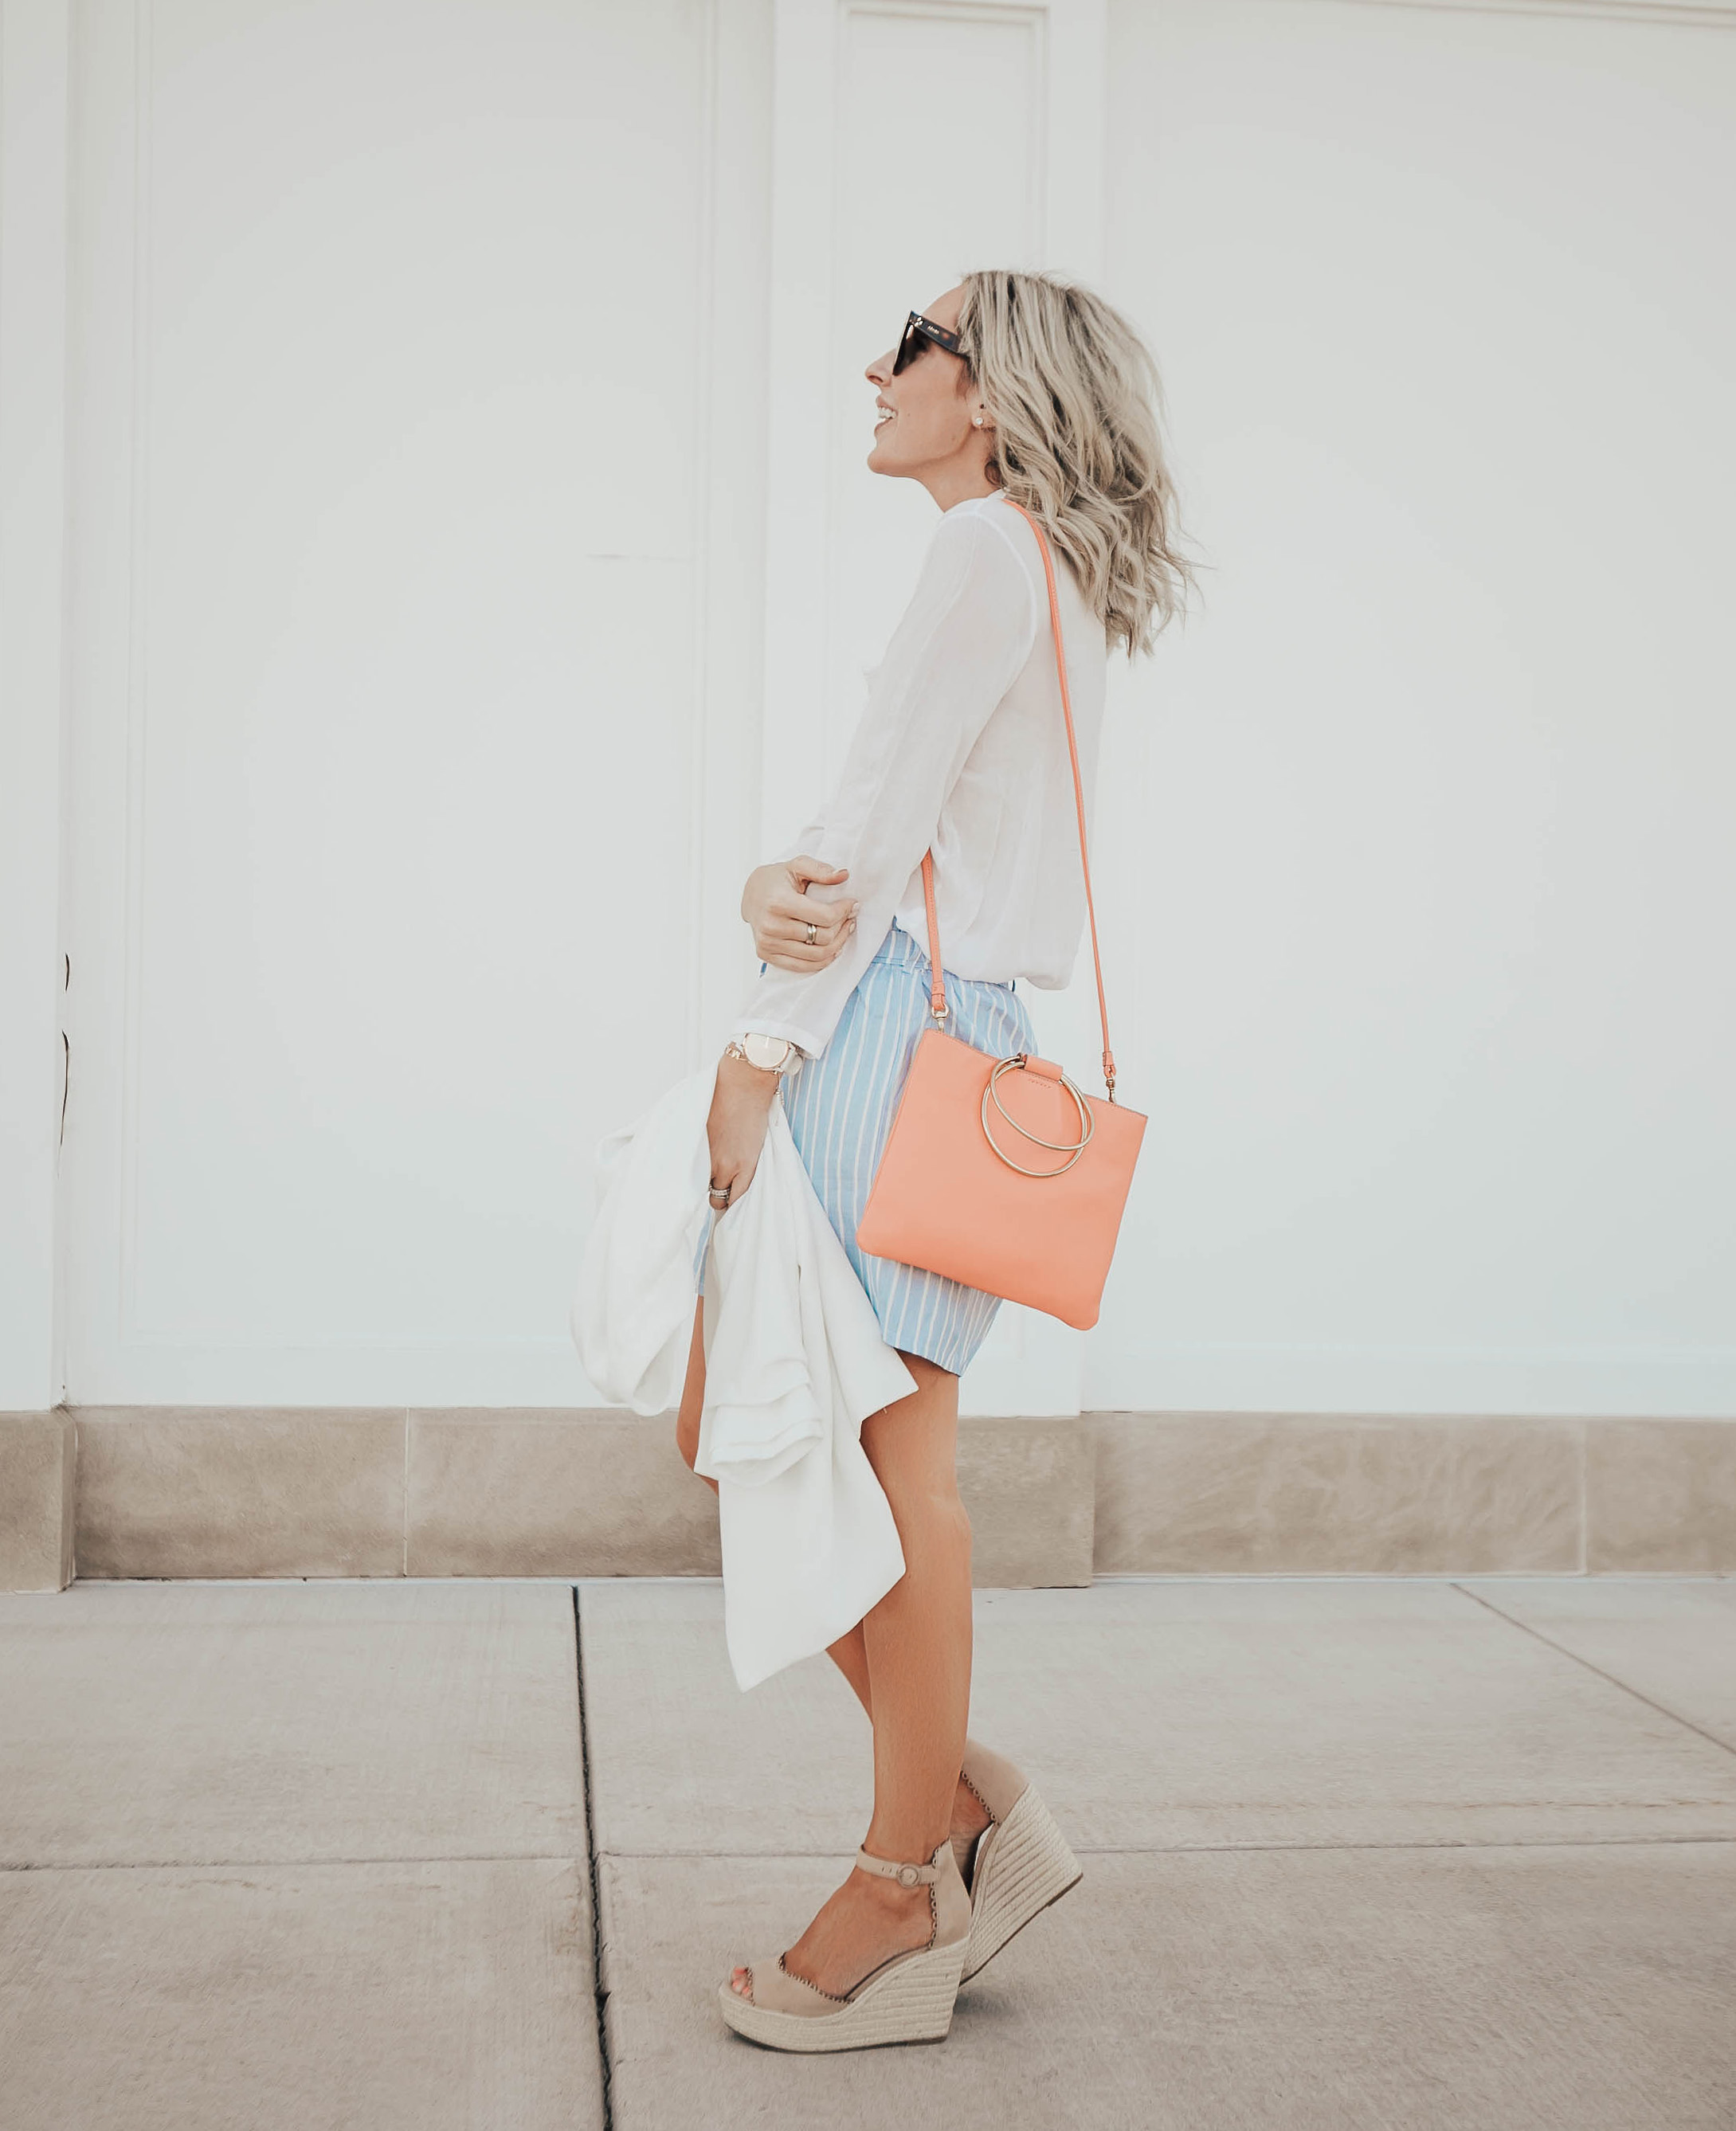 Reno Nevada Blogger, Emily Farren Wieczorek of Two Peas in a Prada shares her new addition to her handbag collection - a coral stunner from Thacker via Zappos